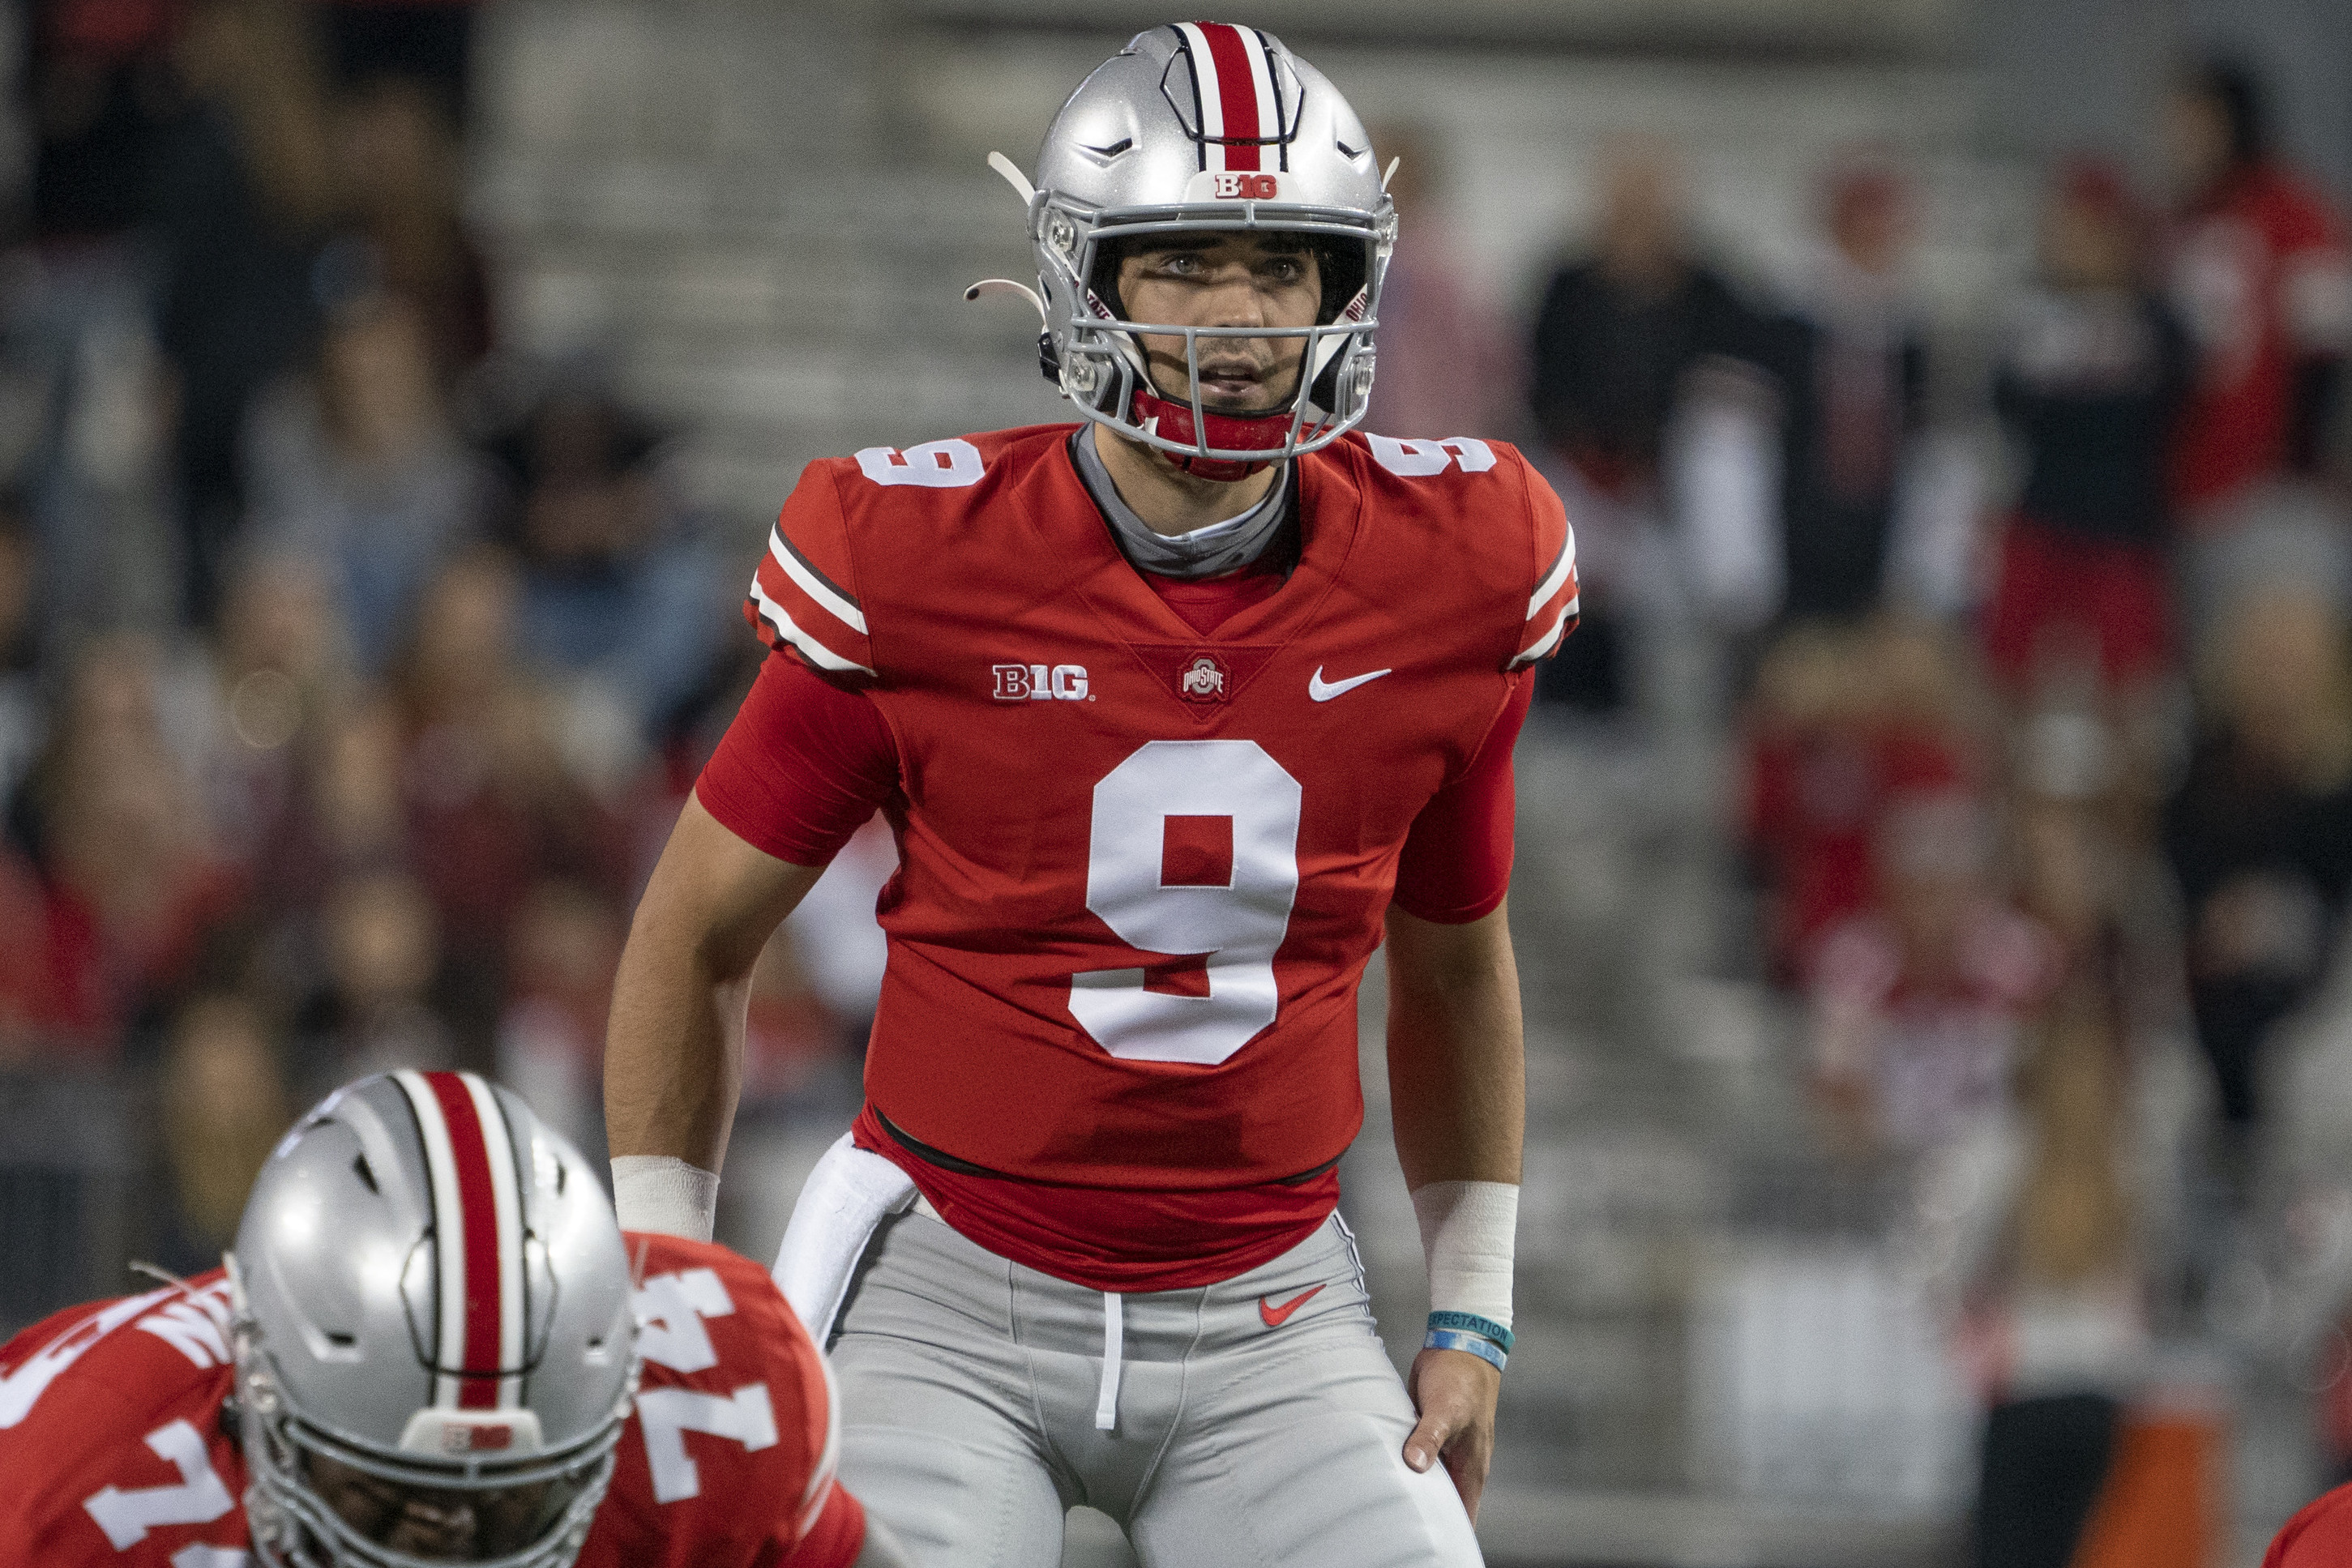 Former Ohio State QB Jack Miller to Transfer to Florida: 'Excited